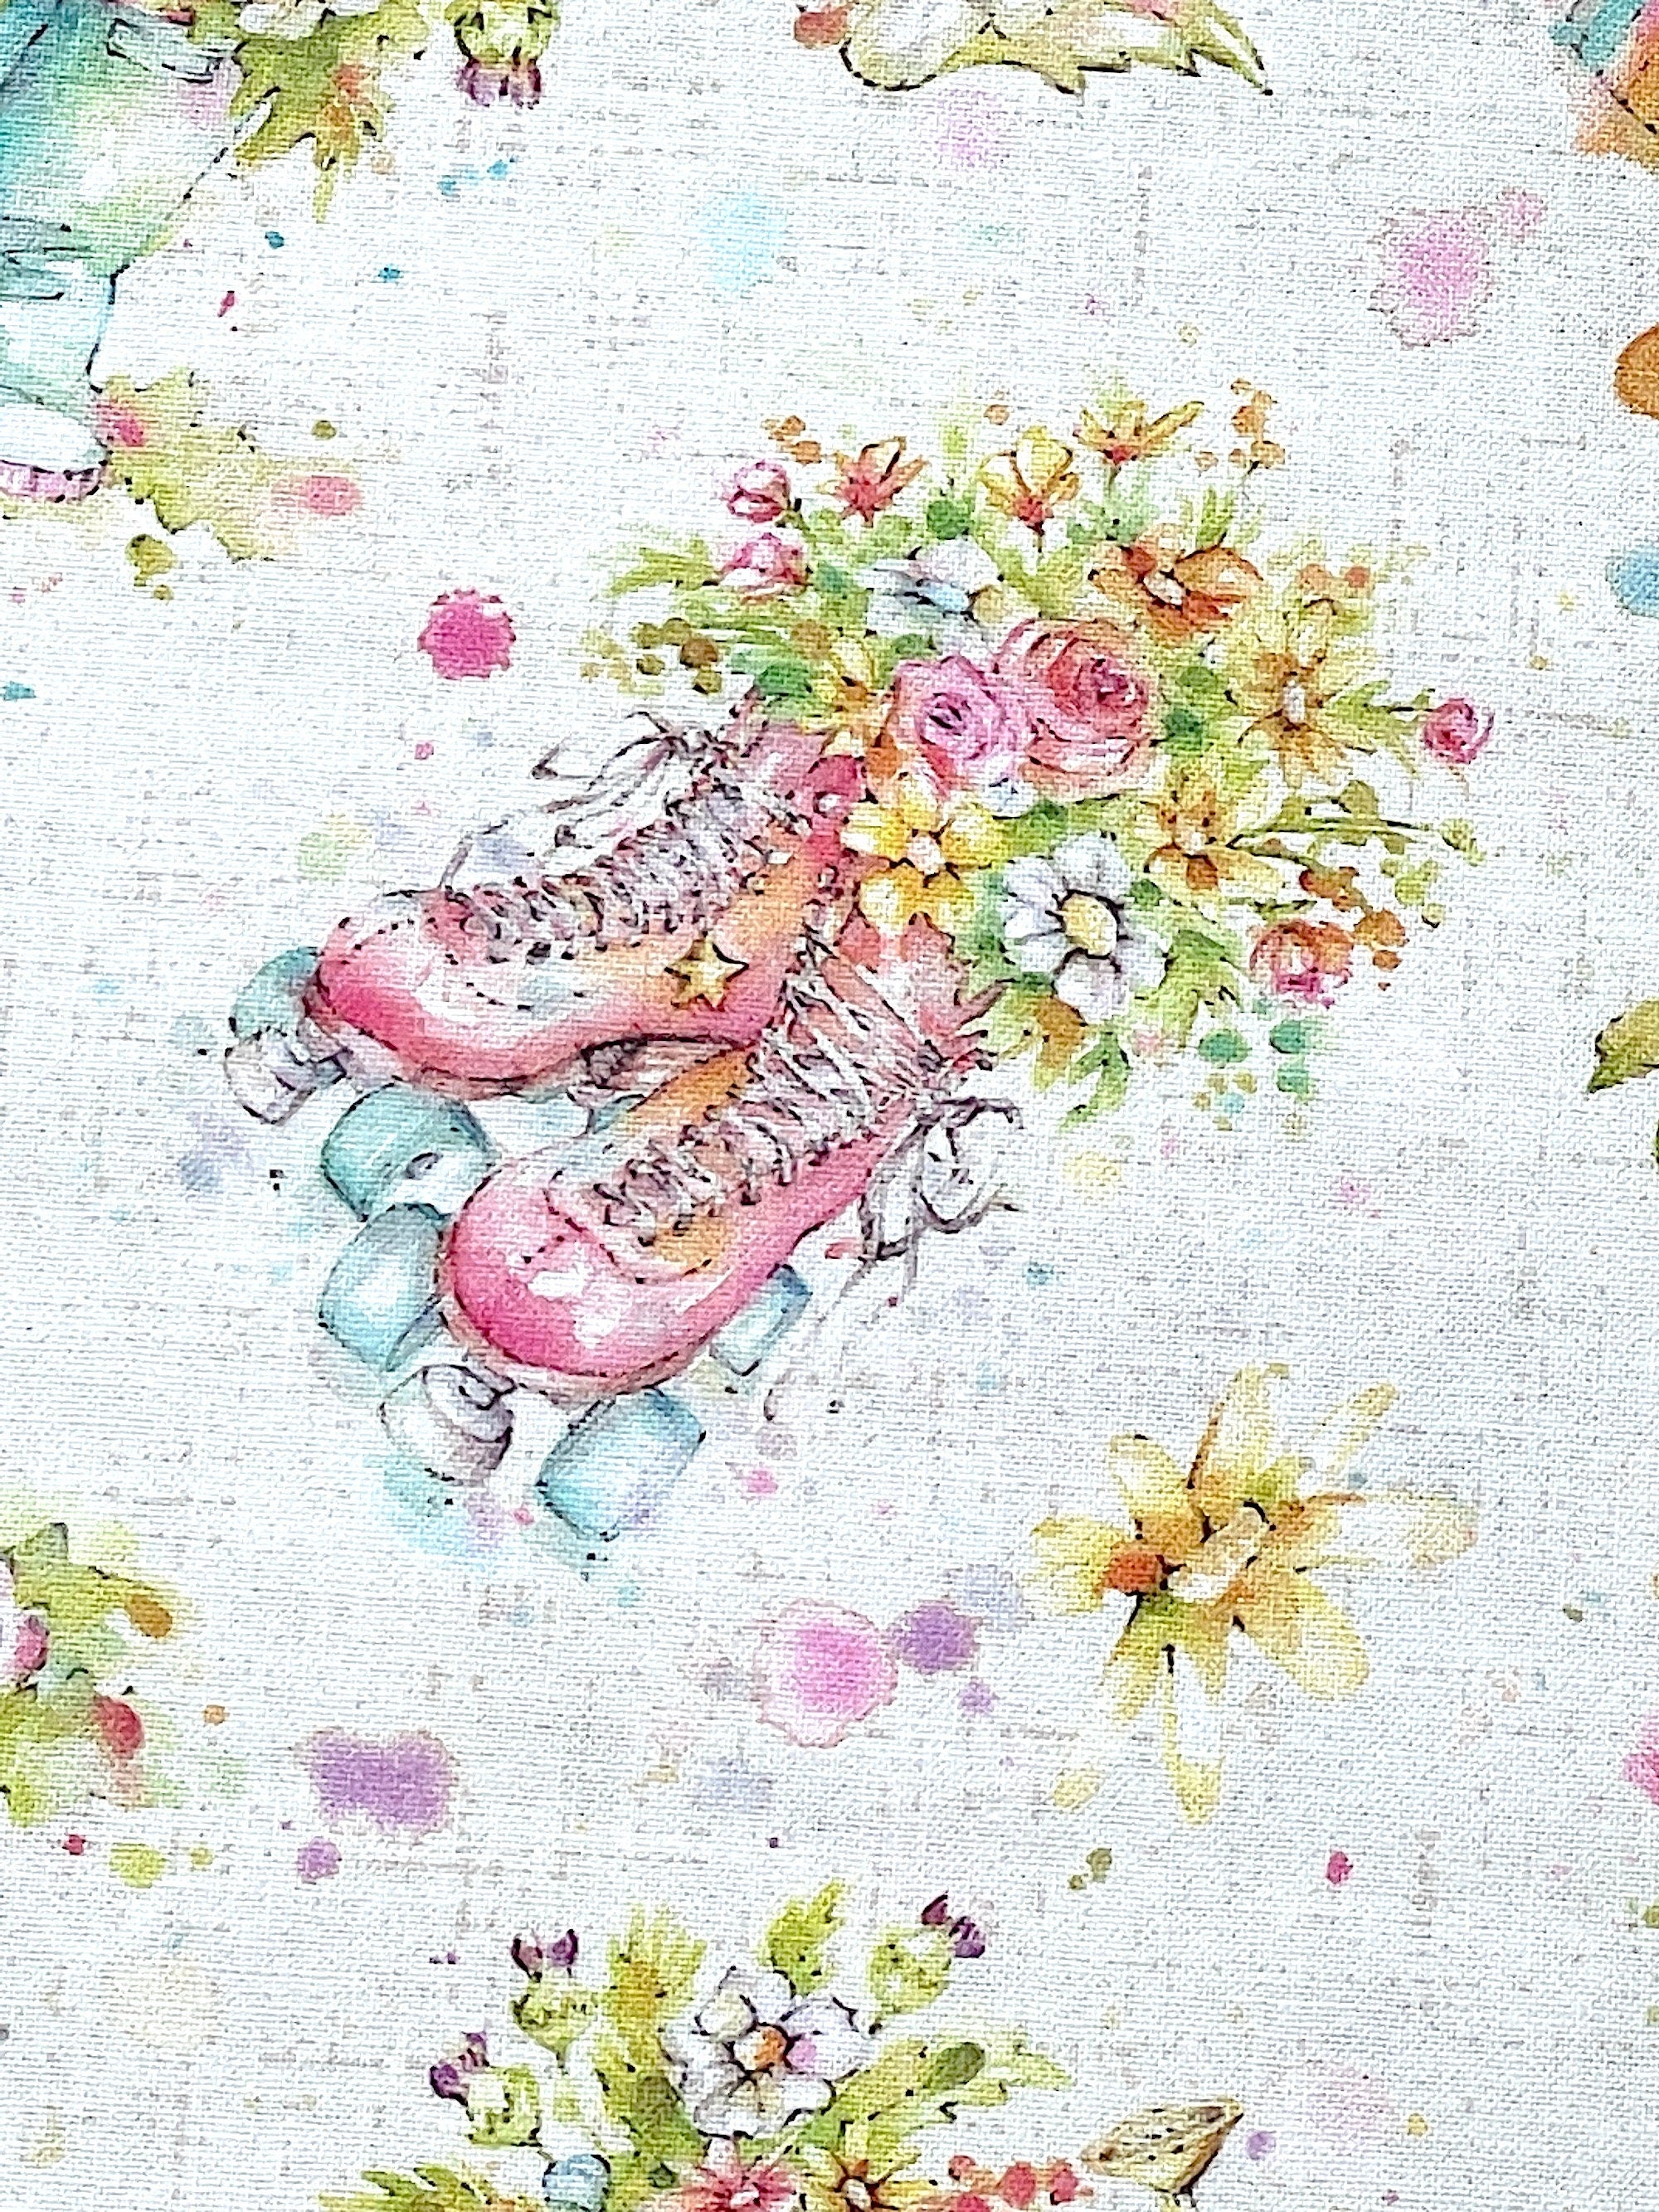 Close up of a pair of roller skates full of flowers.